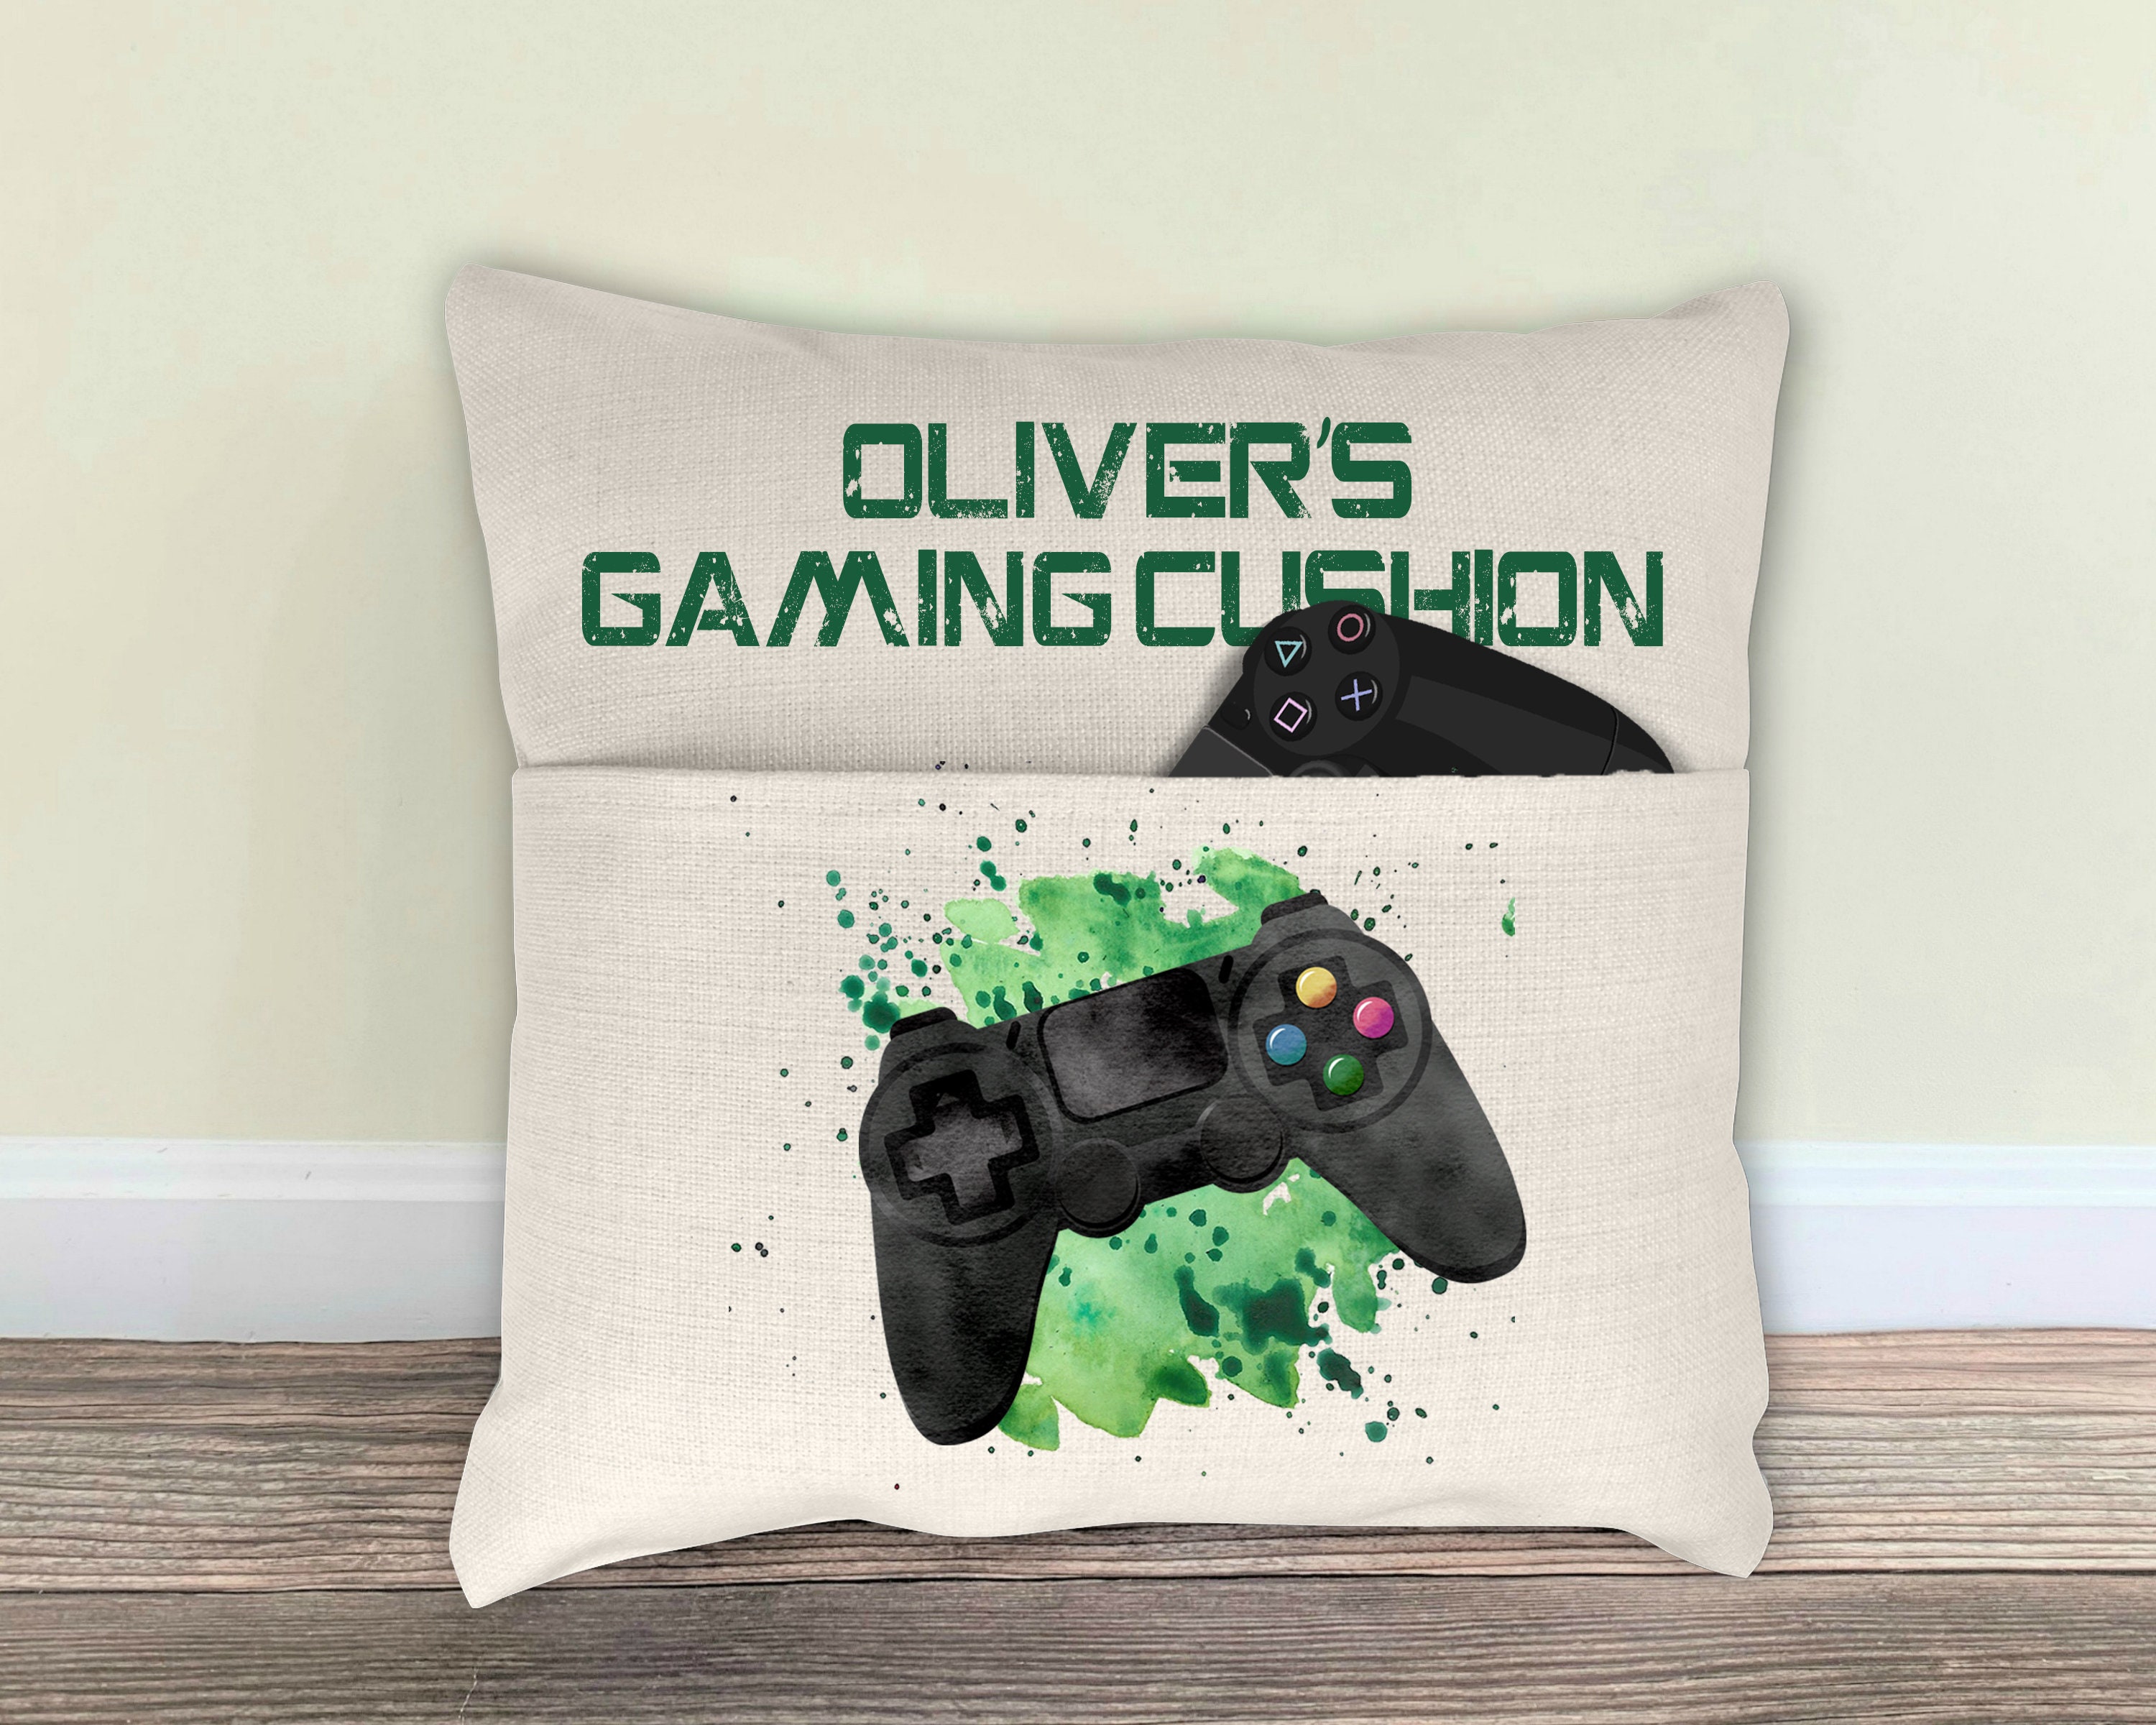 Playstation Xbox Cushion Cover/Case Quality Gamer Pillow Case UK Seller